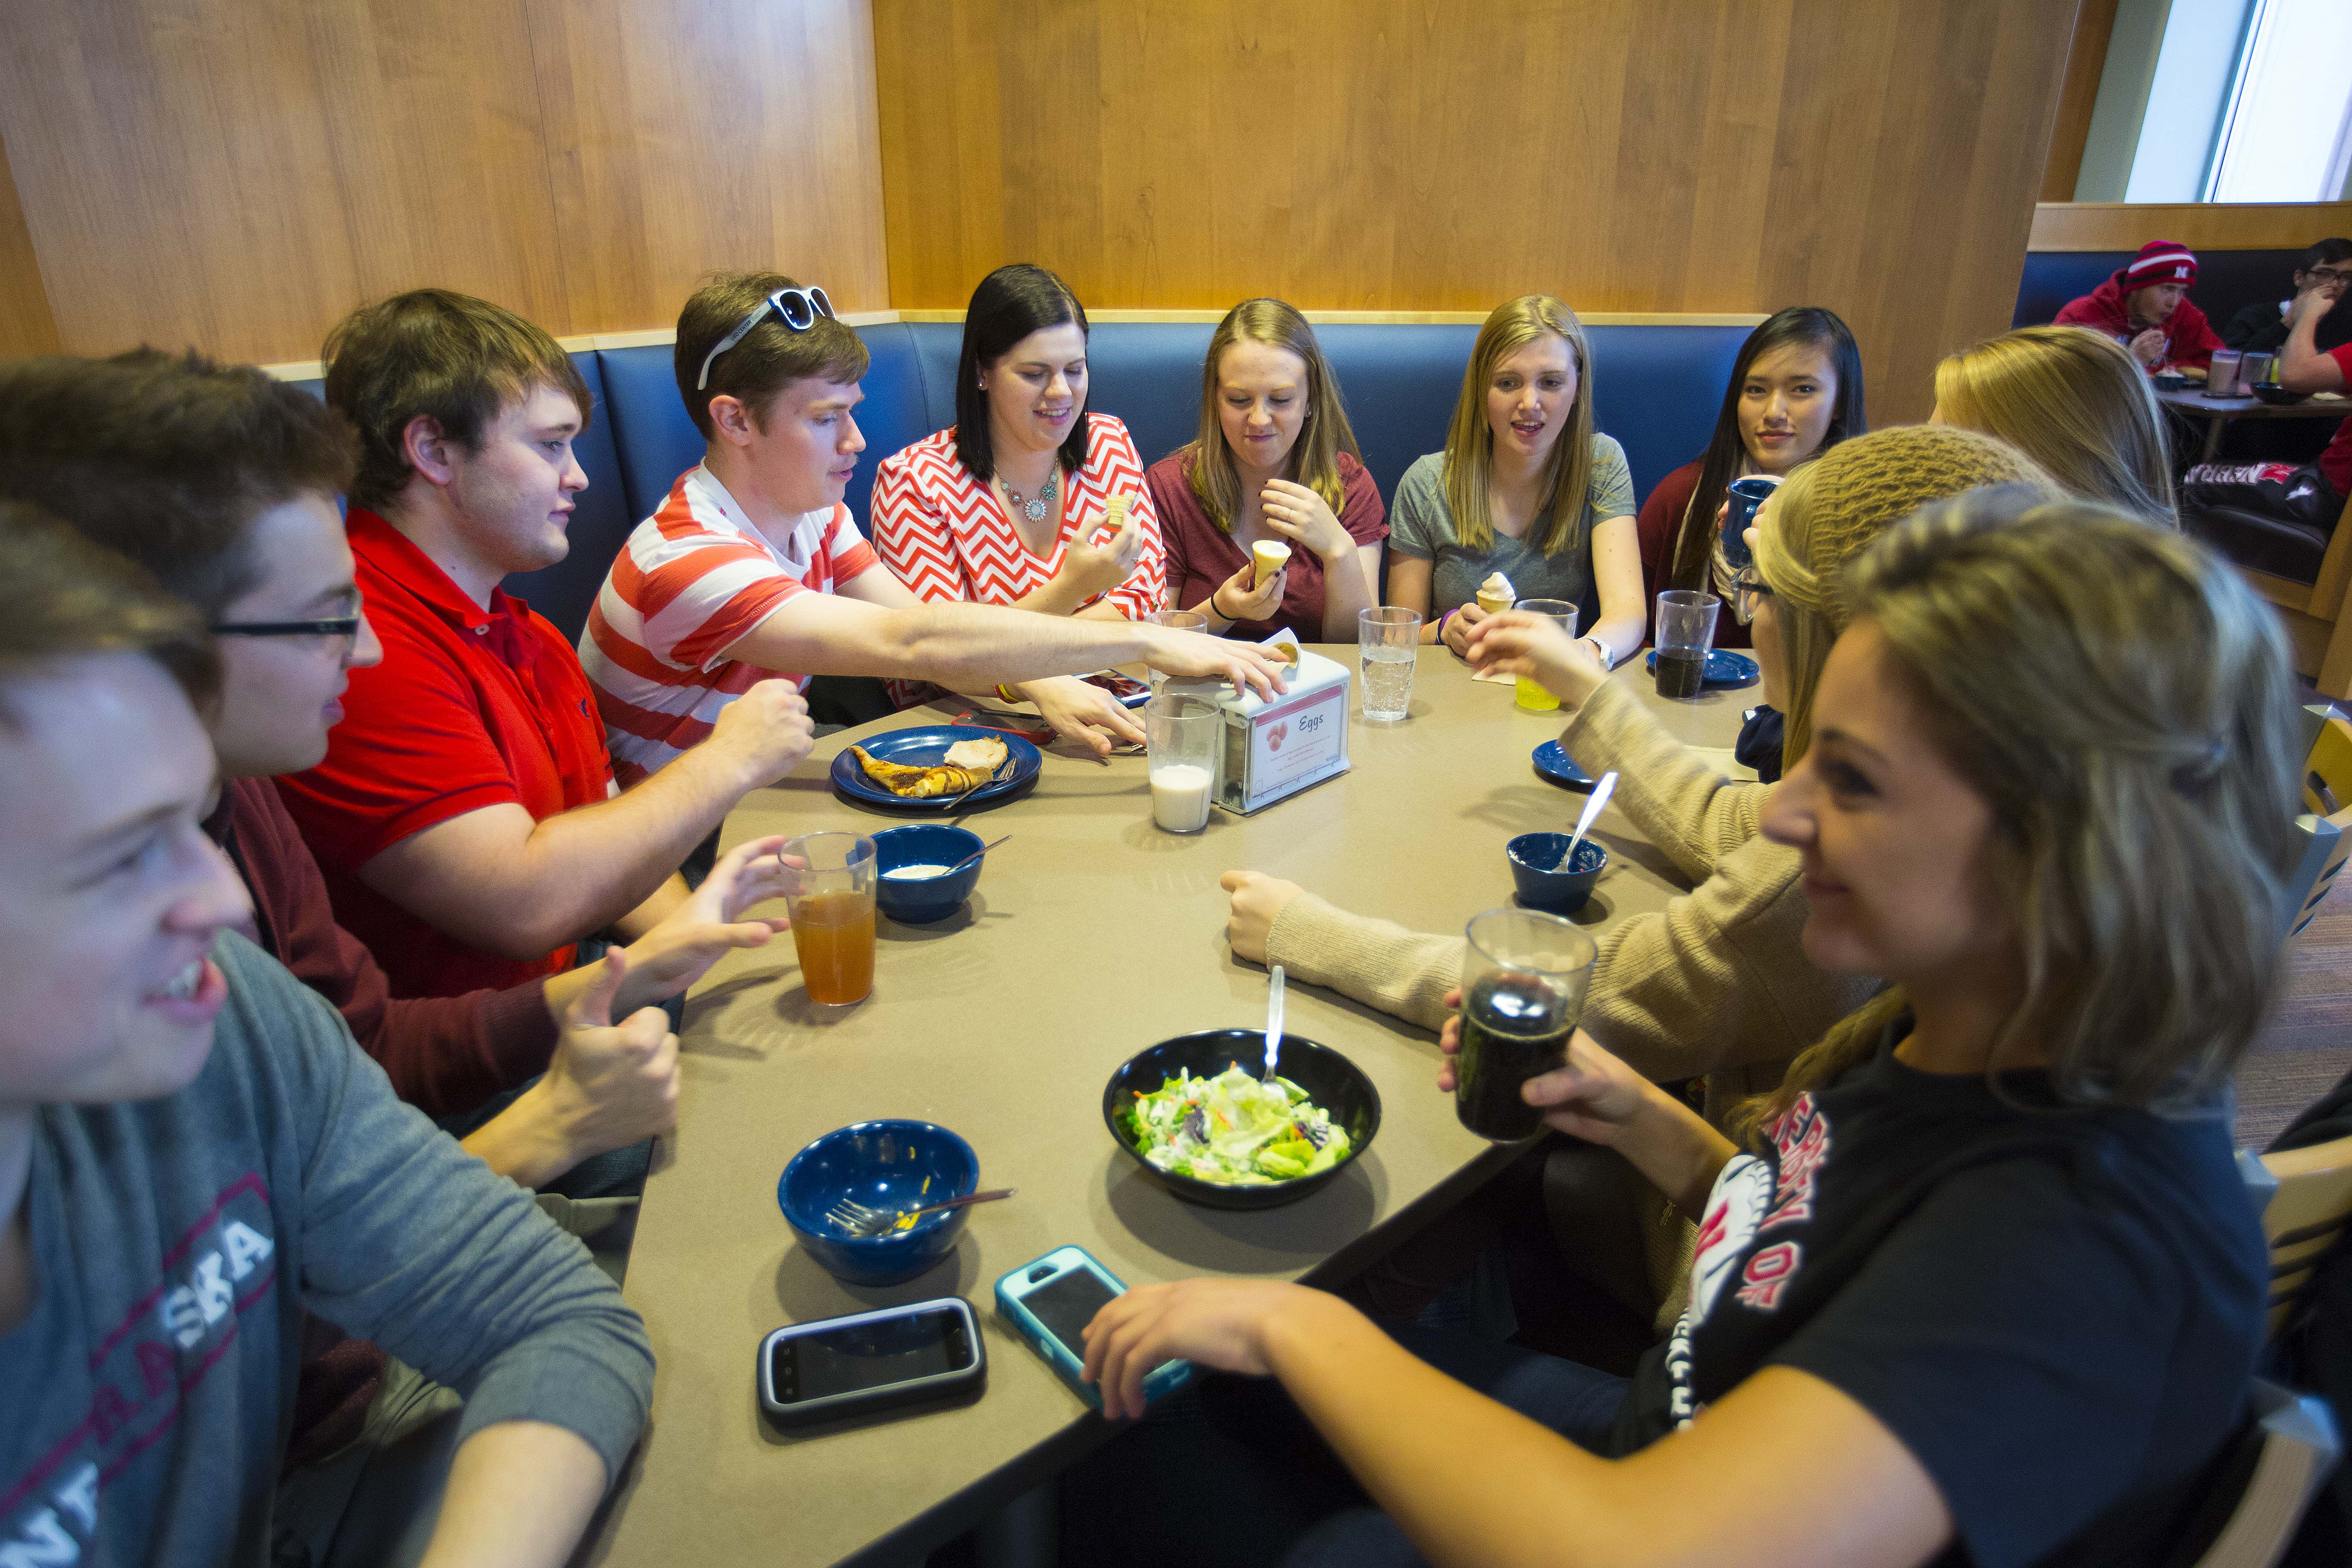 Students in the dining center.